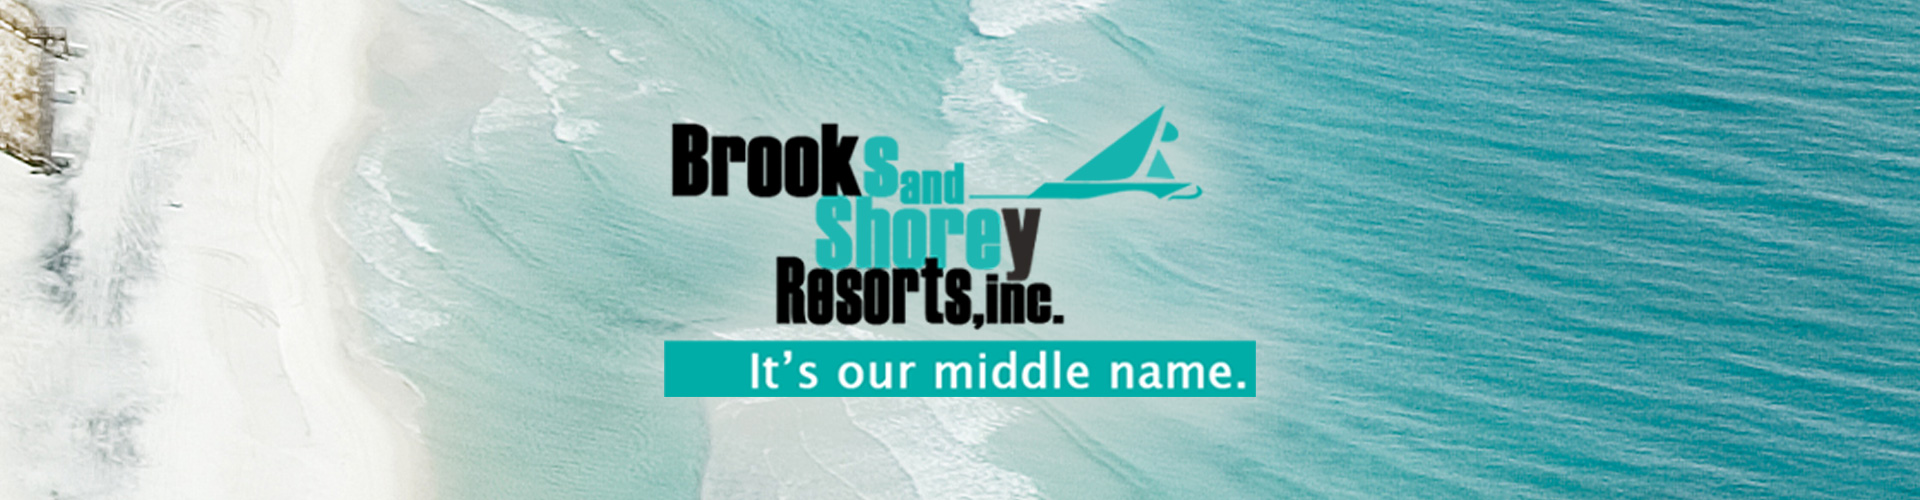 Brooks and Shorey Banner